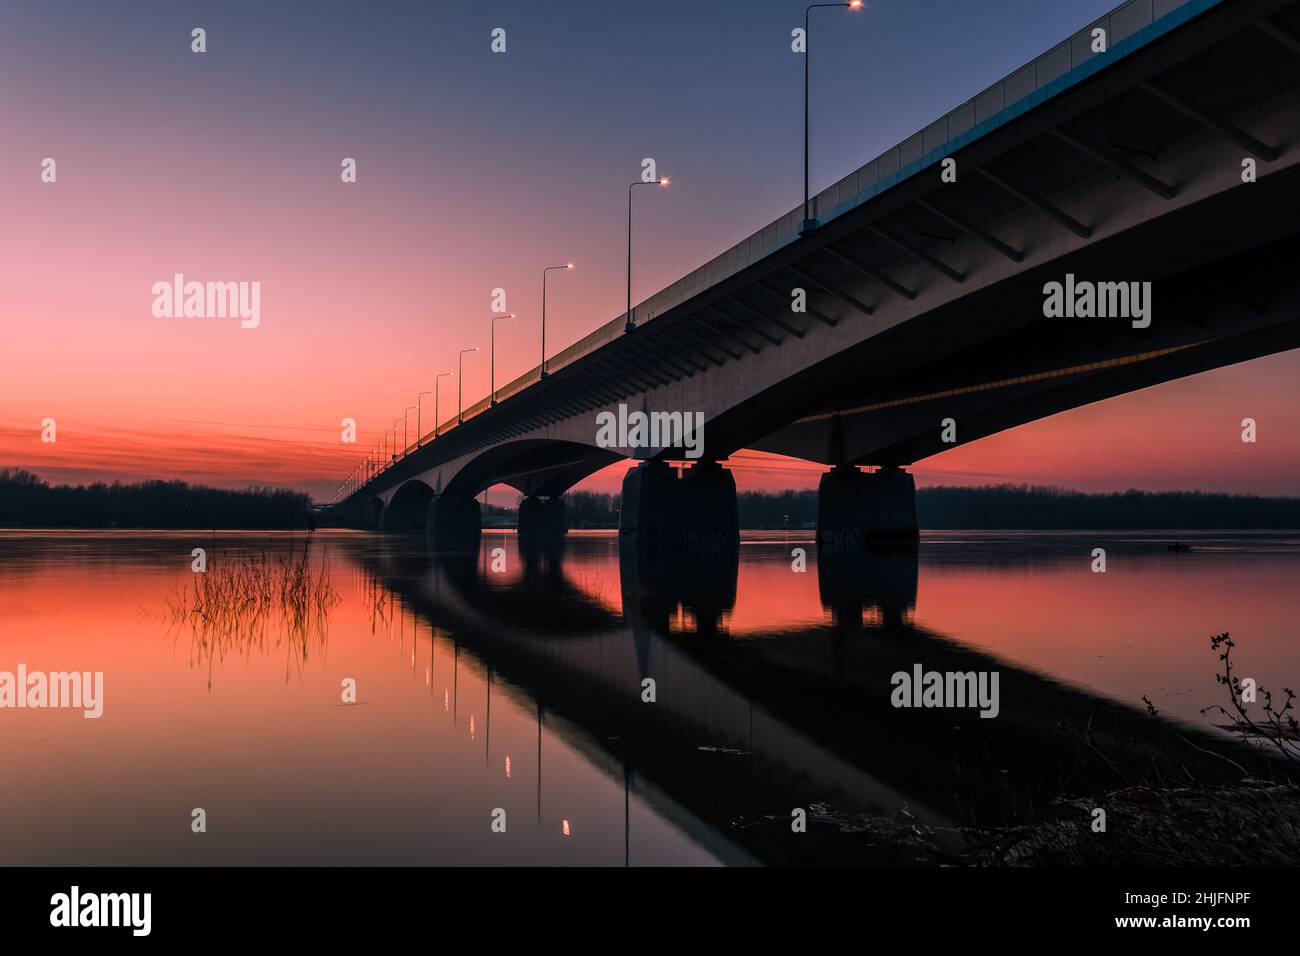 Colorful Warsaw bridge across Vistula River with reflections in water at sunset. Stock Photo